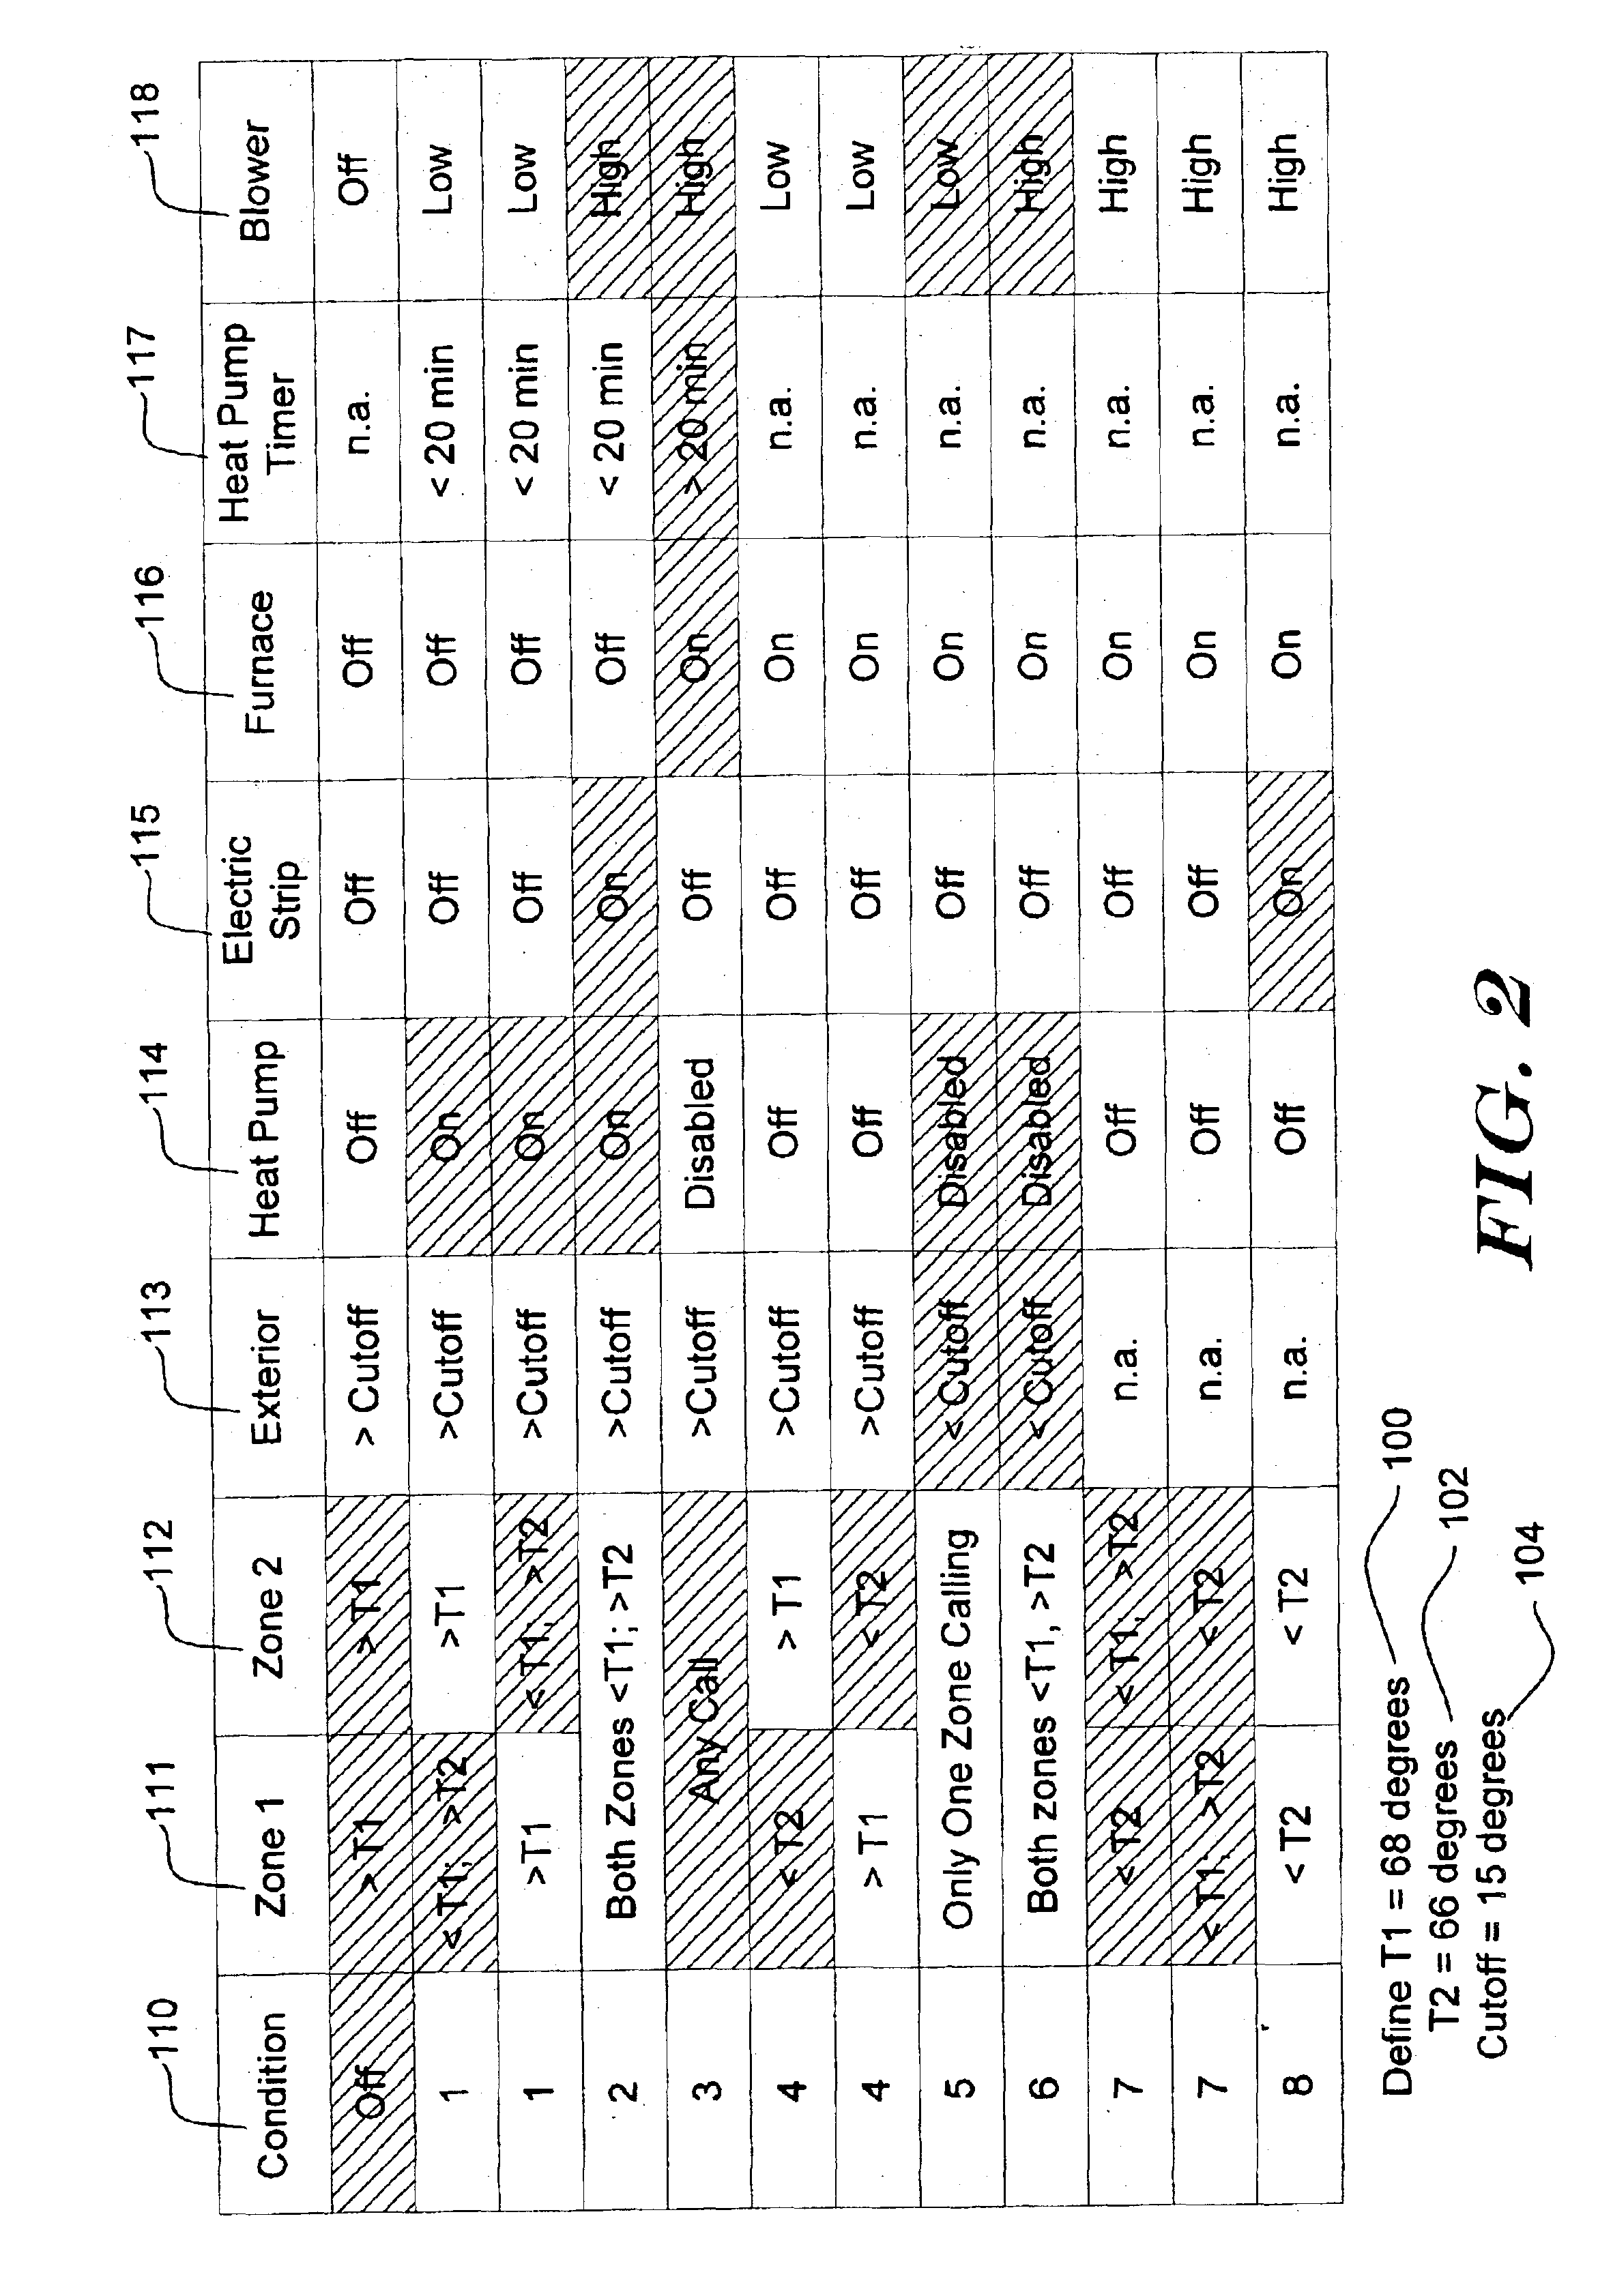 Method and apparatus for controlling a multi-source heating system